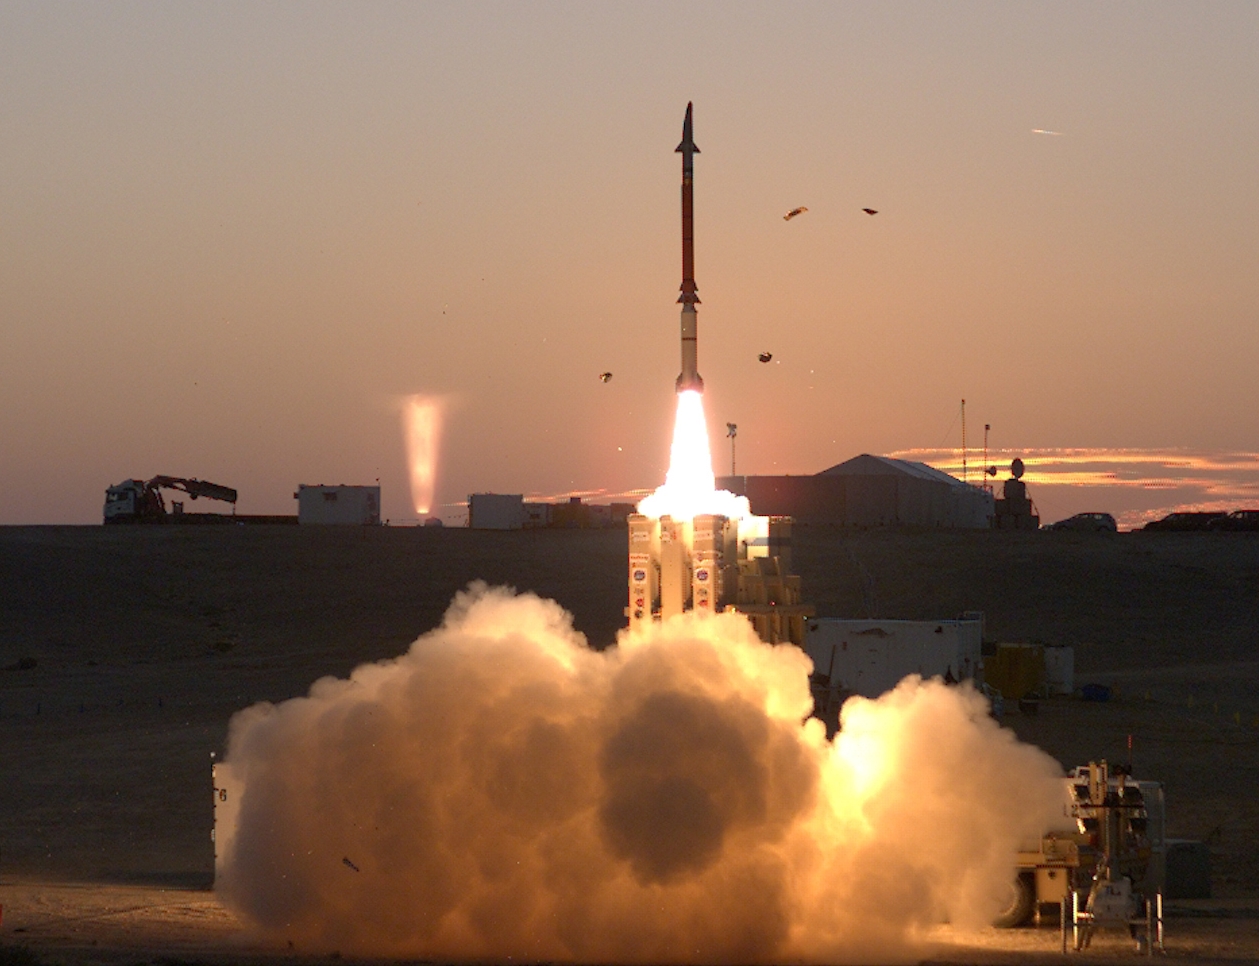 Stunner missile of the David's Sling air defense system